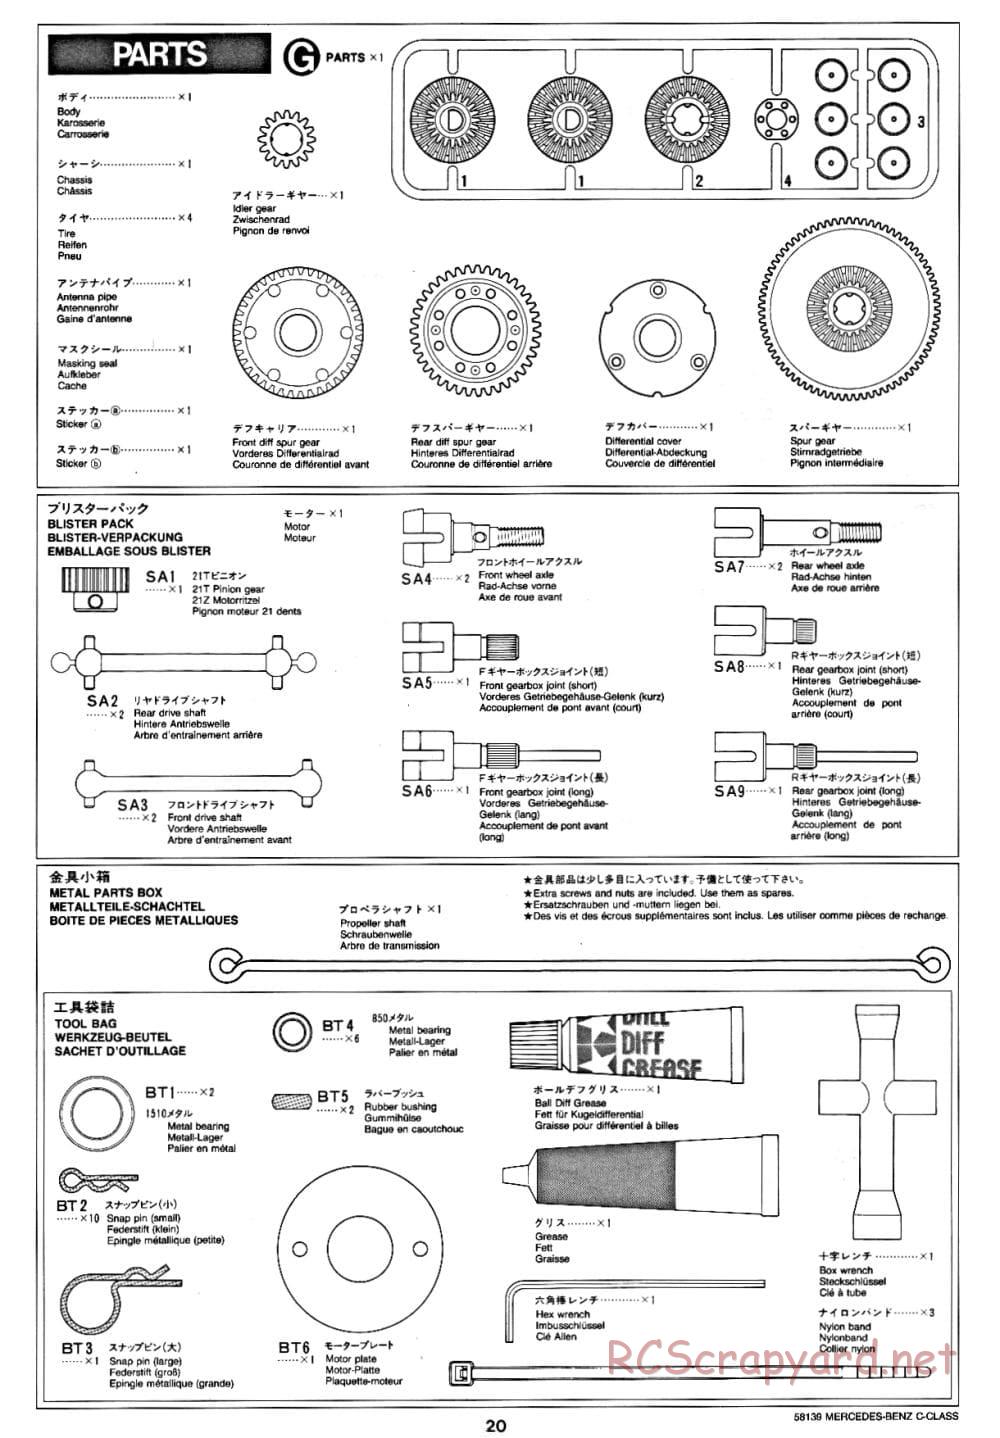 Tamiya - AMG Mercedes-Benz C-Class DTM D2 - TA-02 Chassis - Manual - Page 21